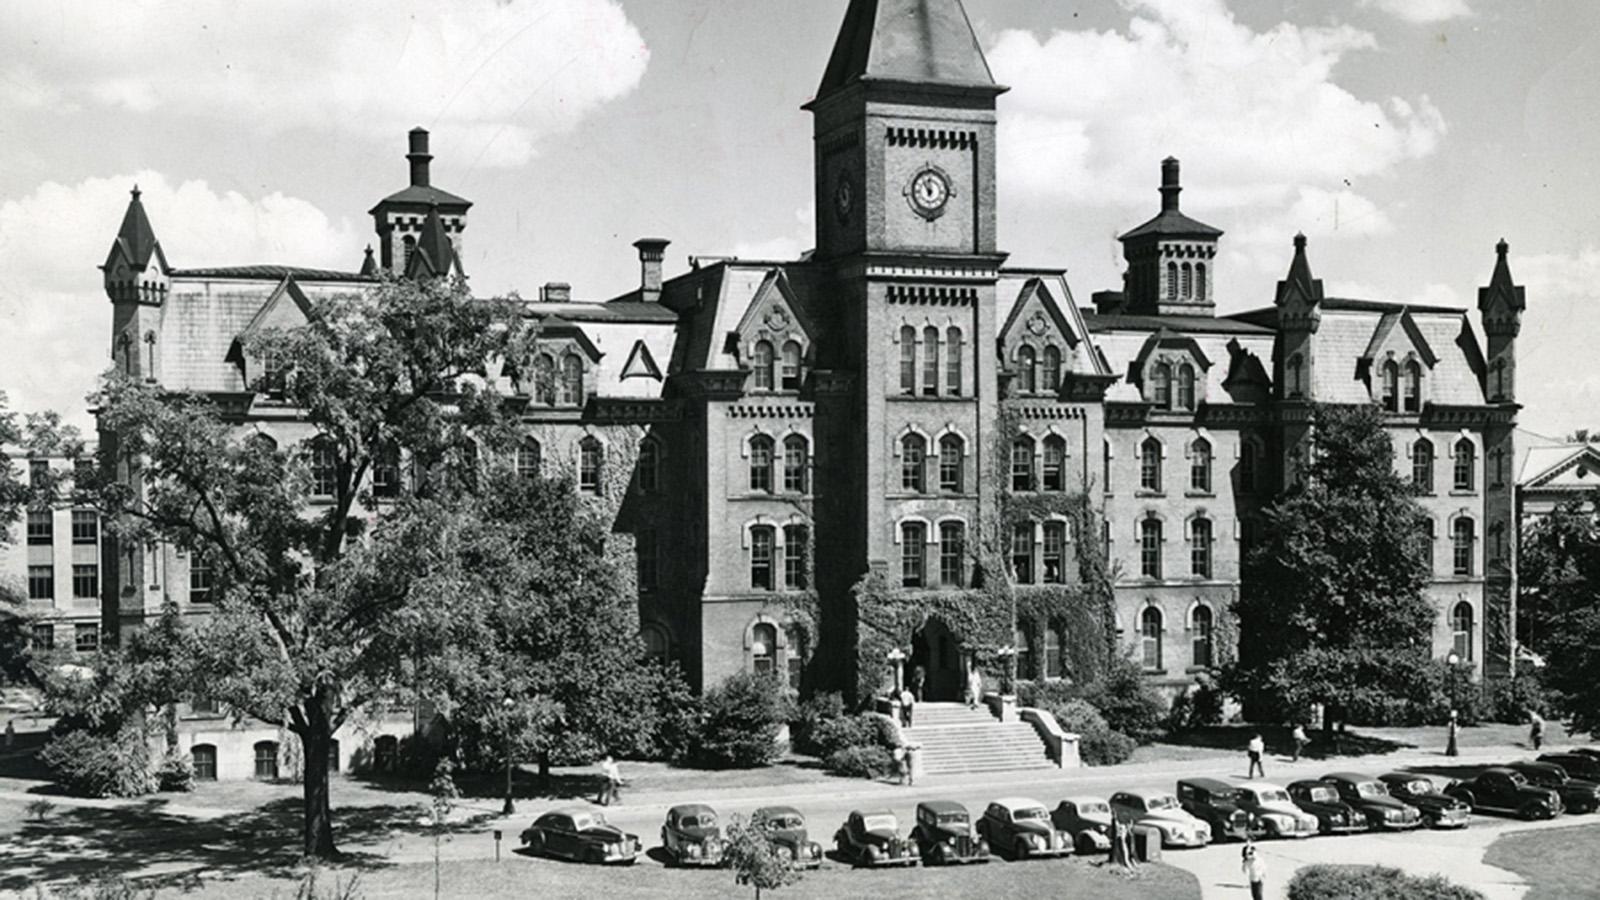 University Hall with 1940s cars parked in the front